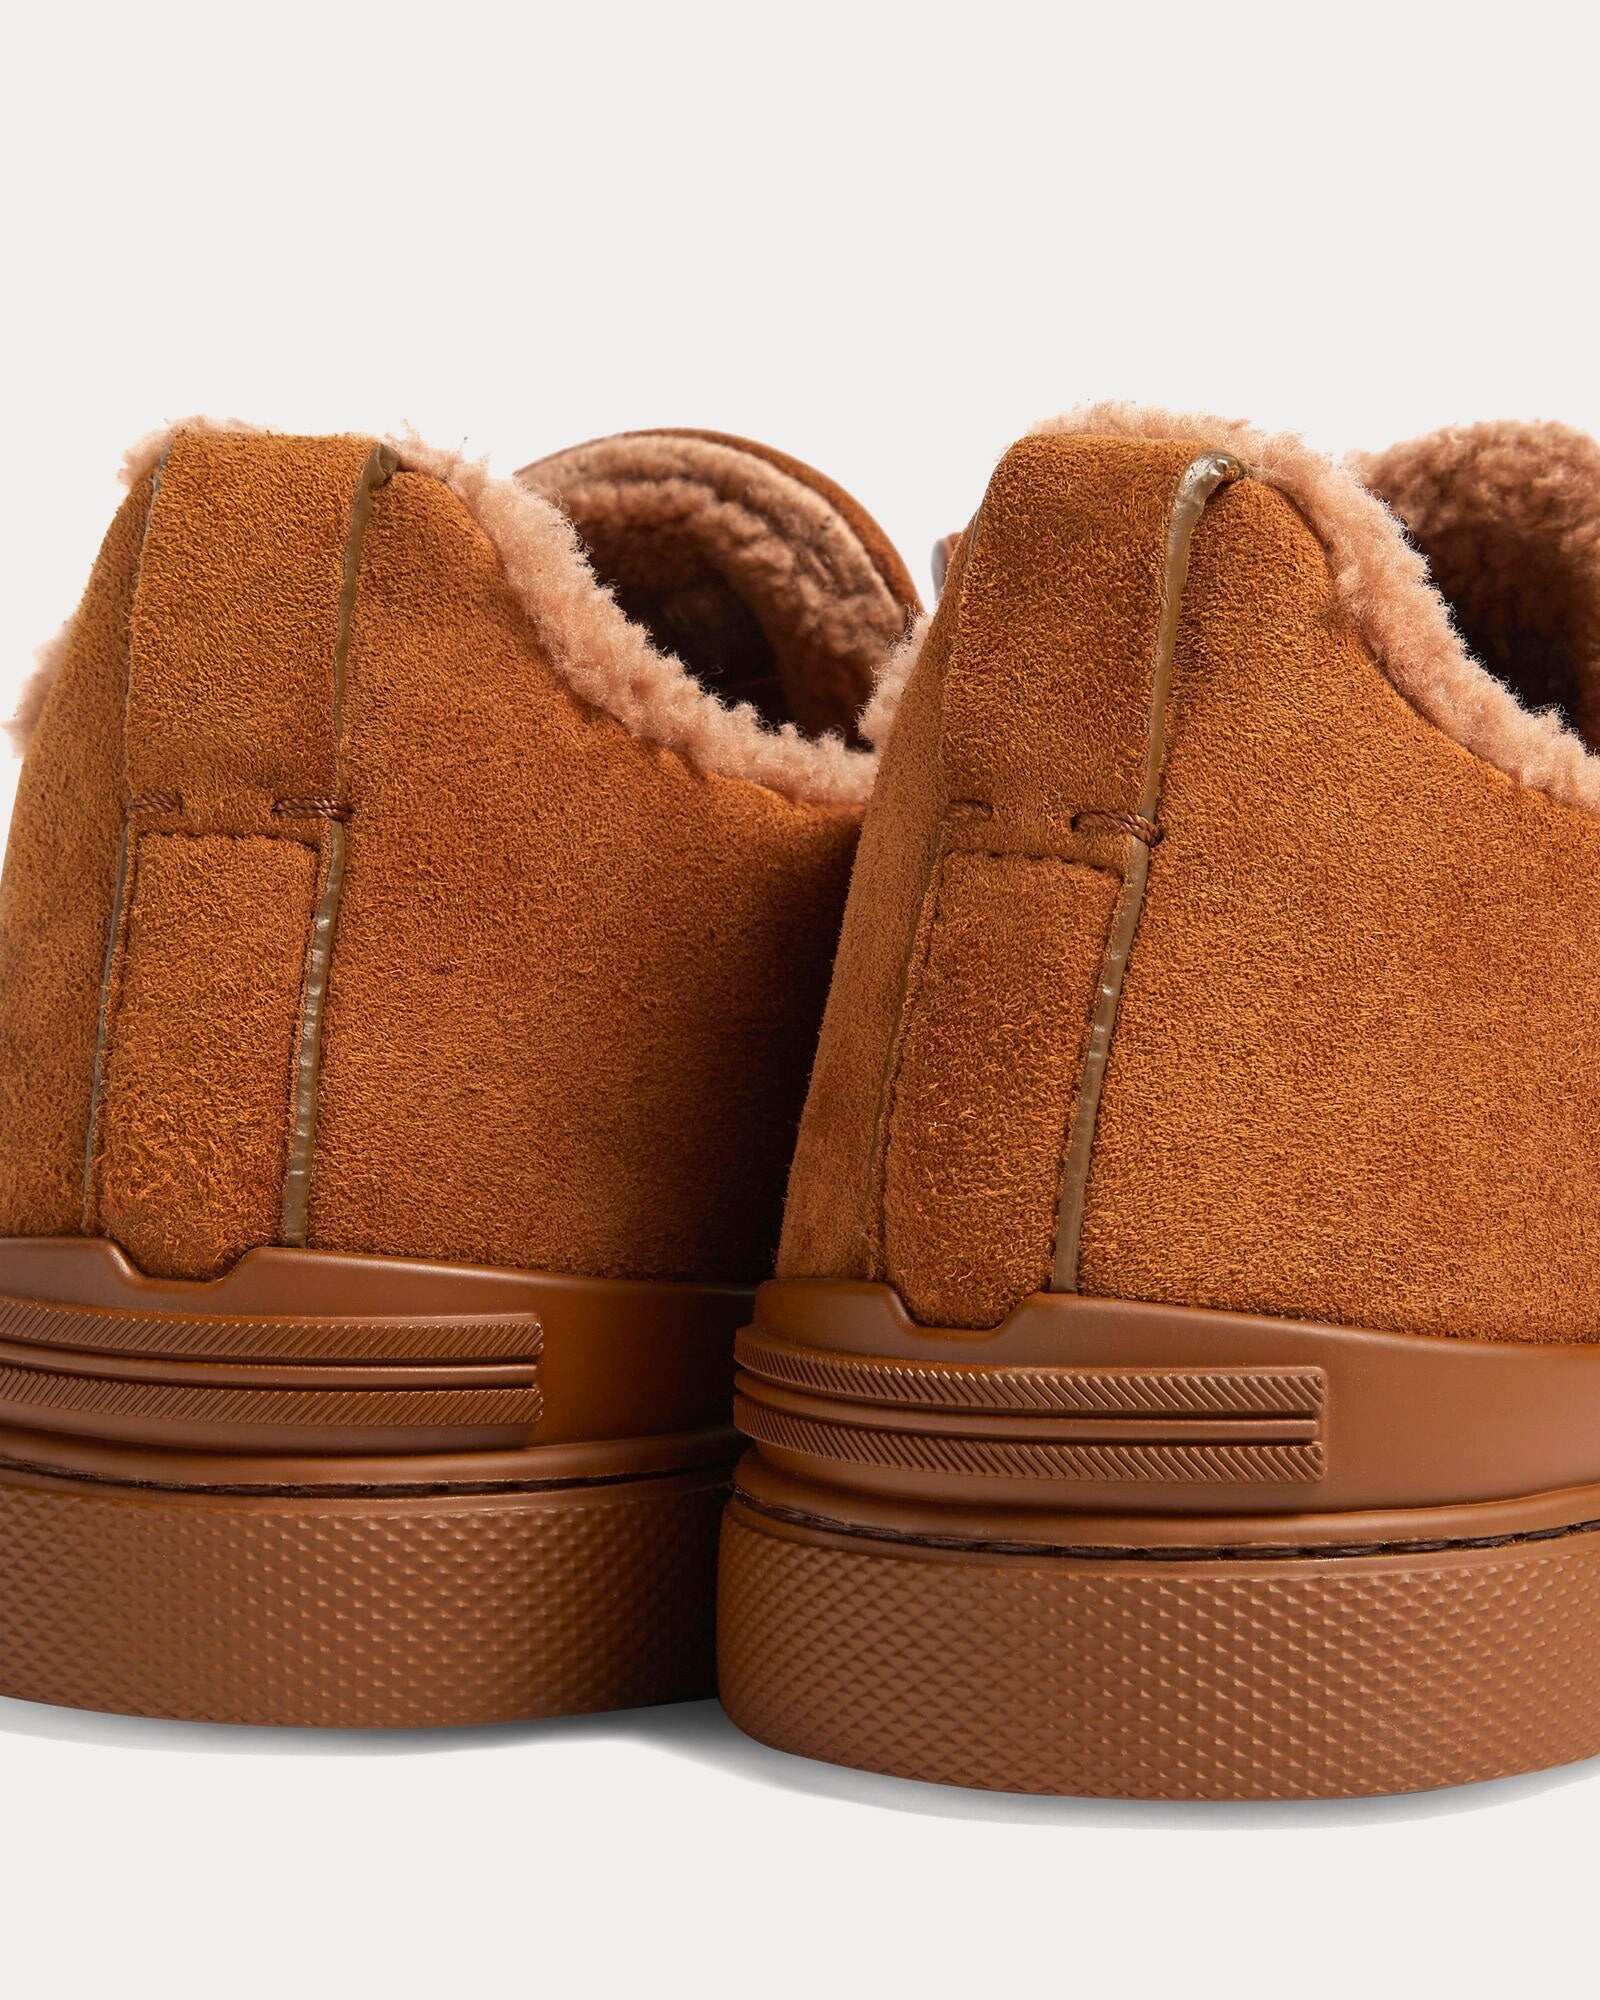 Zegna - Triple Stitch Suede & Shearling Light Brown Slip On Sneakers